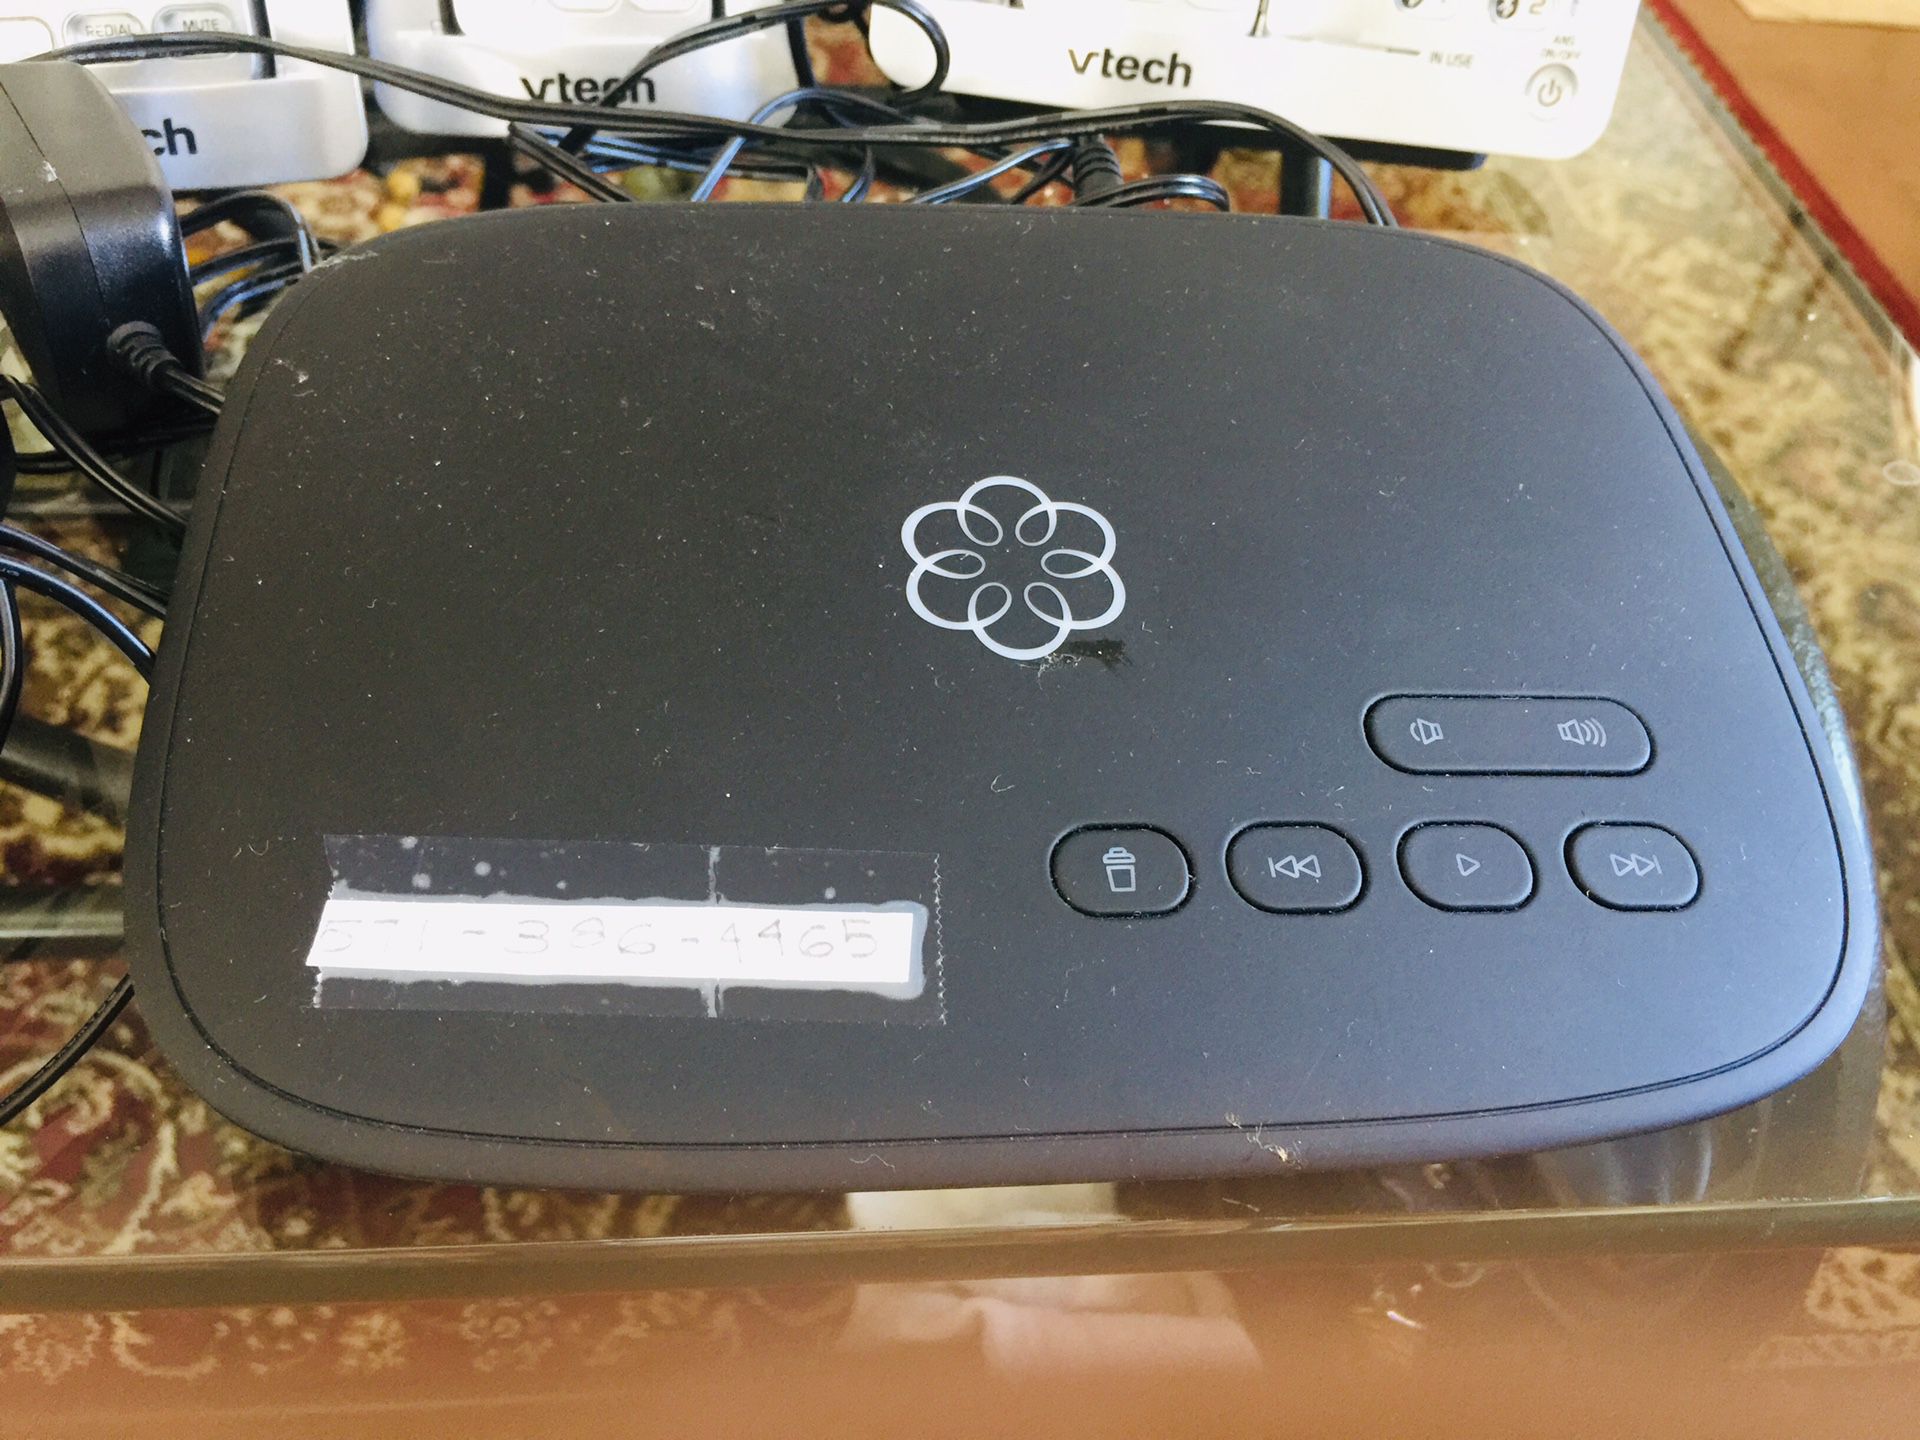 Ooma Phone System, cuts monthly phone bills drastically!